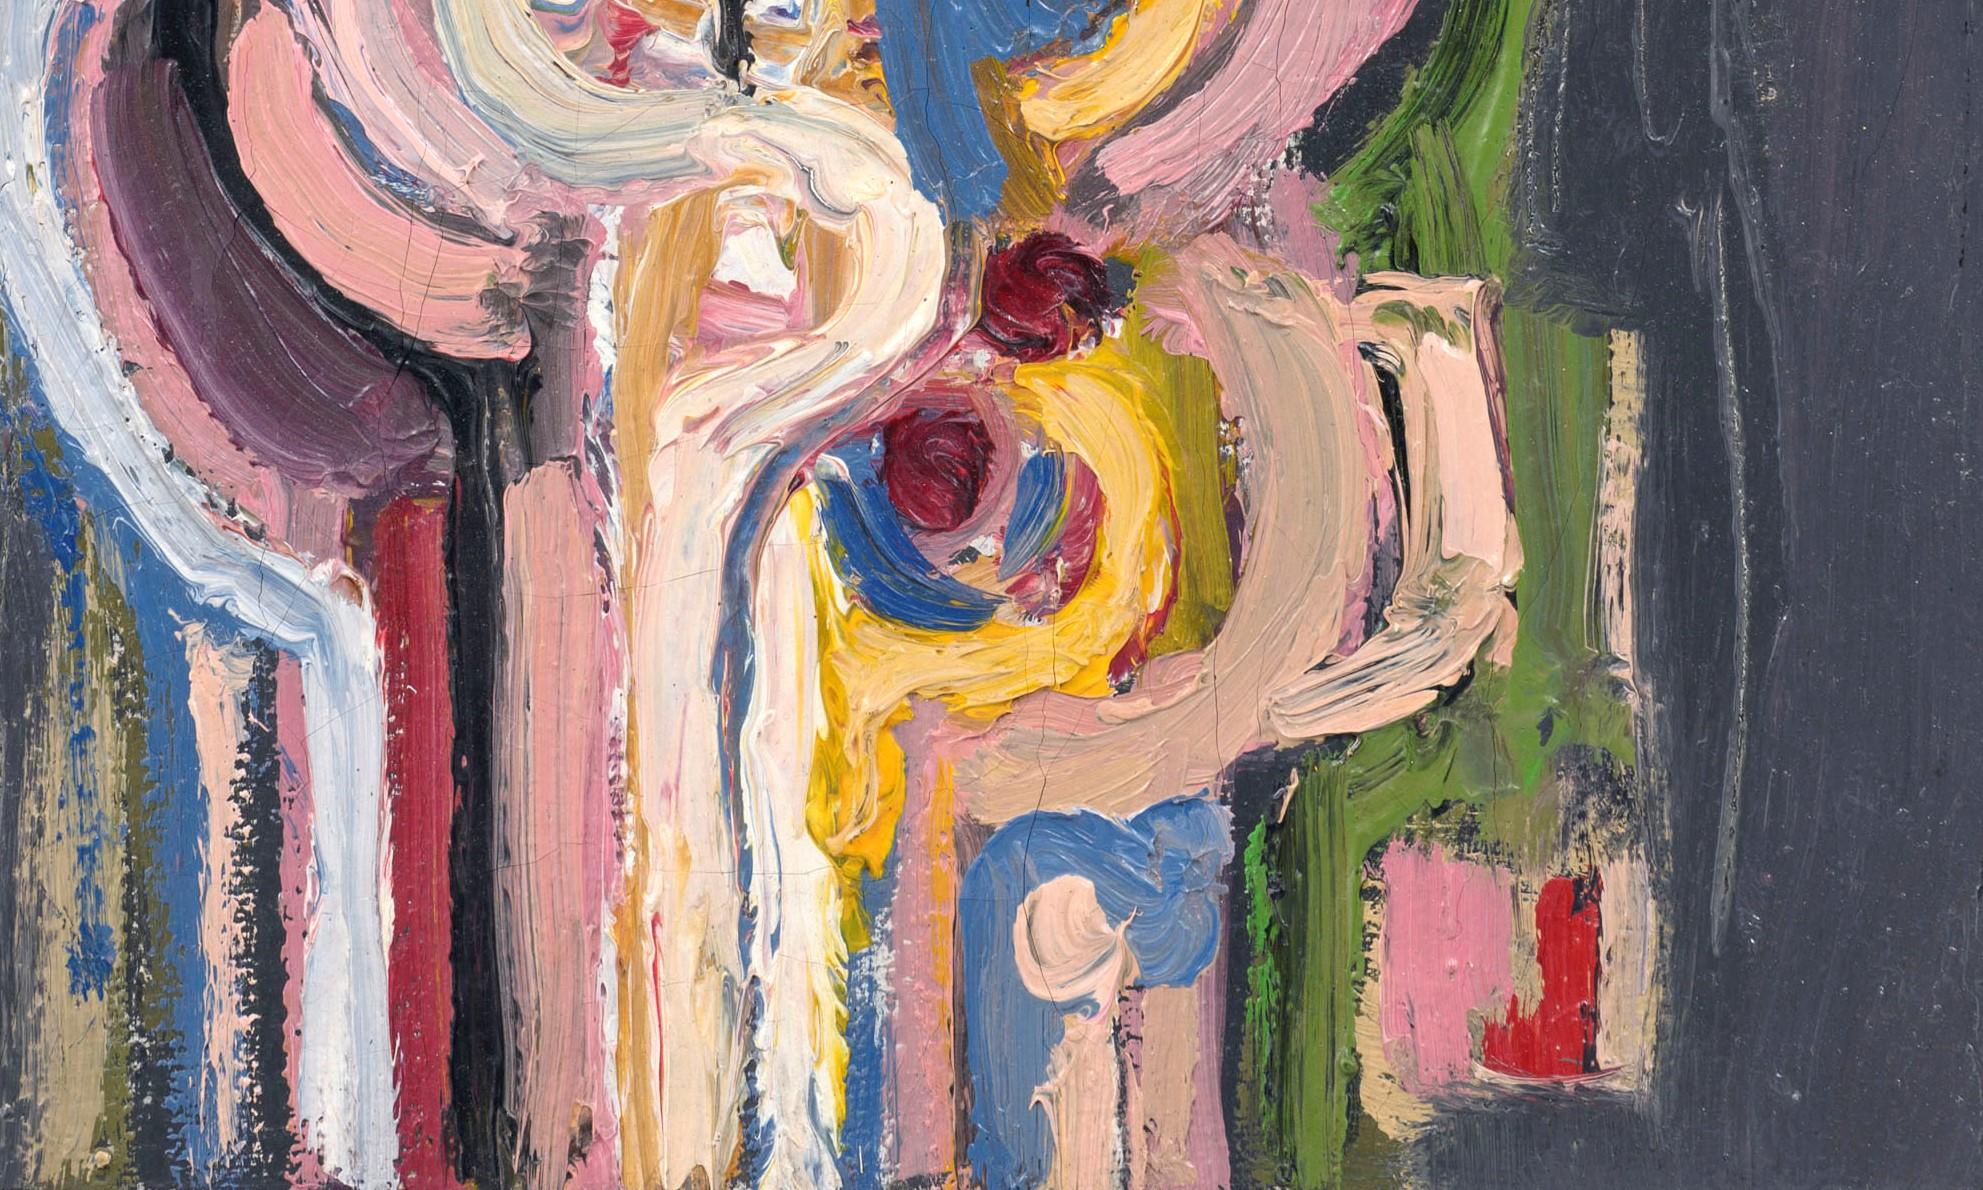 Corps nu et rose, Corneille, 1955 (Modernist Abstract Painting) For Sale 2